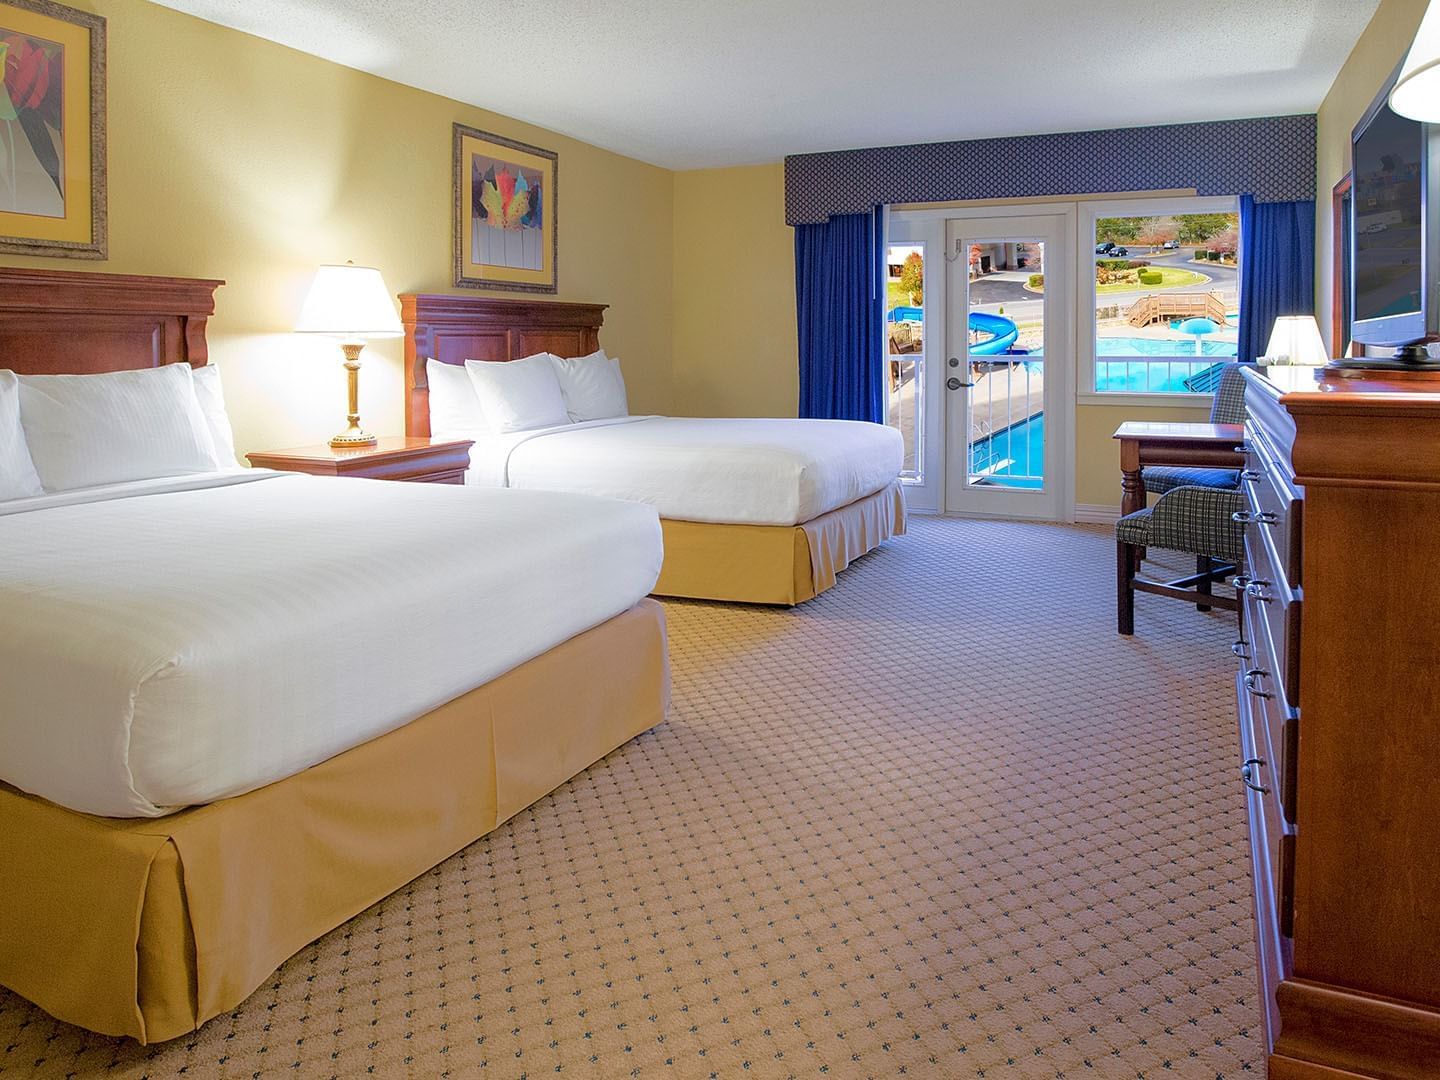 Deluxe Queen Room with a Waterpark view at Music Road Resort